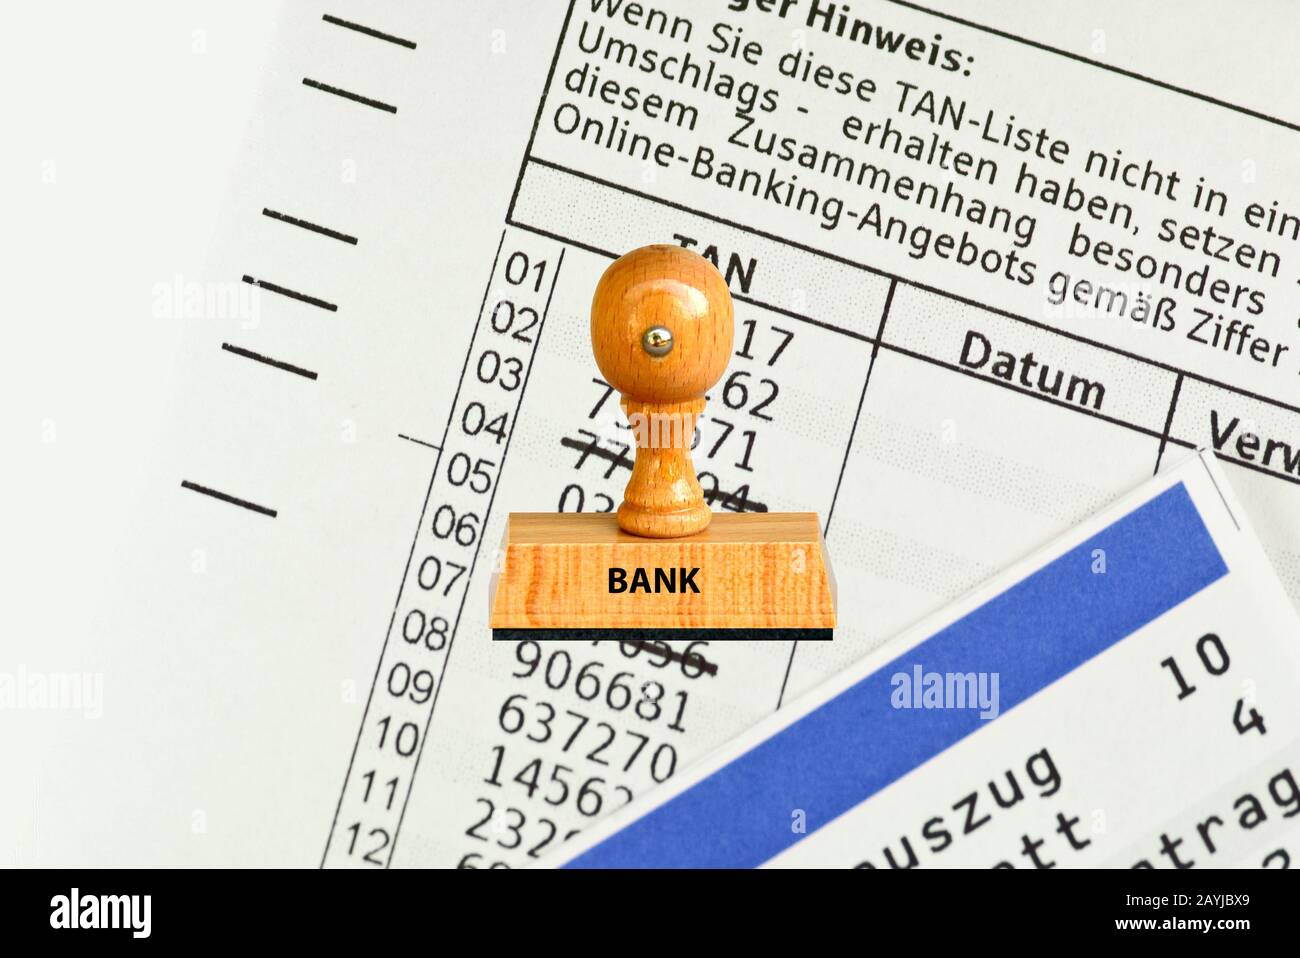 stamp lettering bank, bank, statement of bank account in the background , Germany Stock Photo